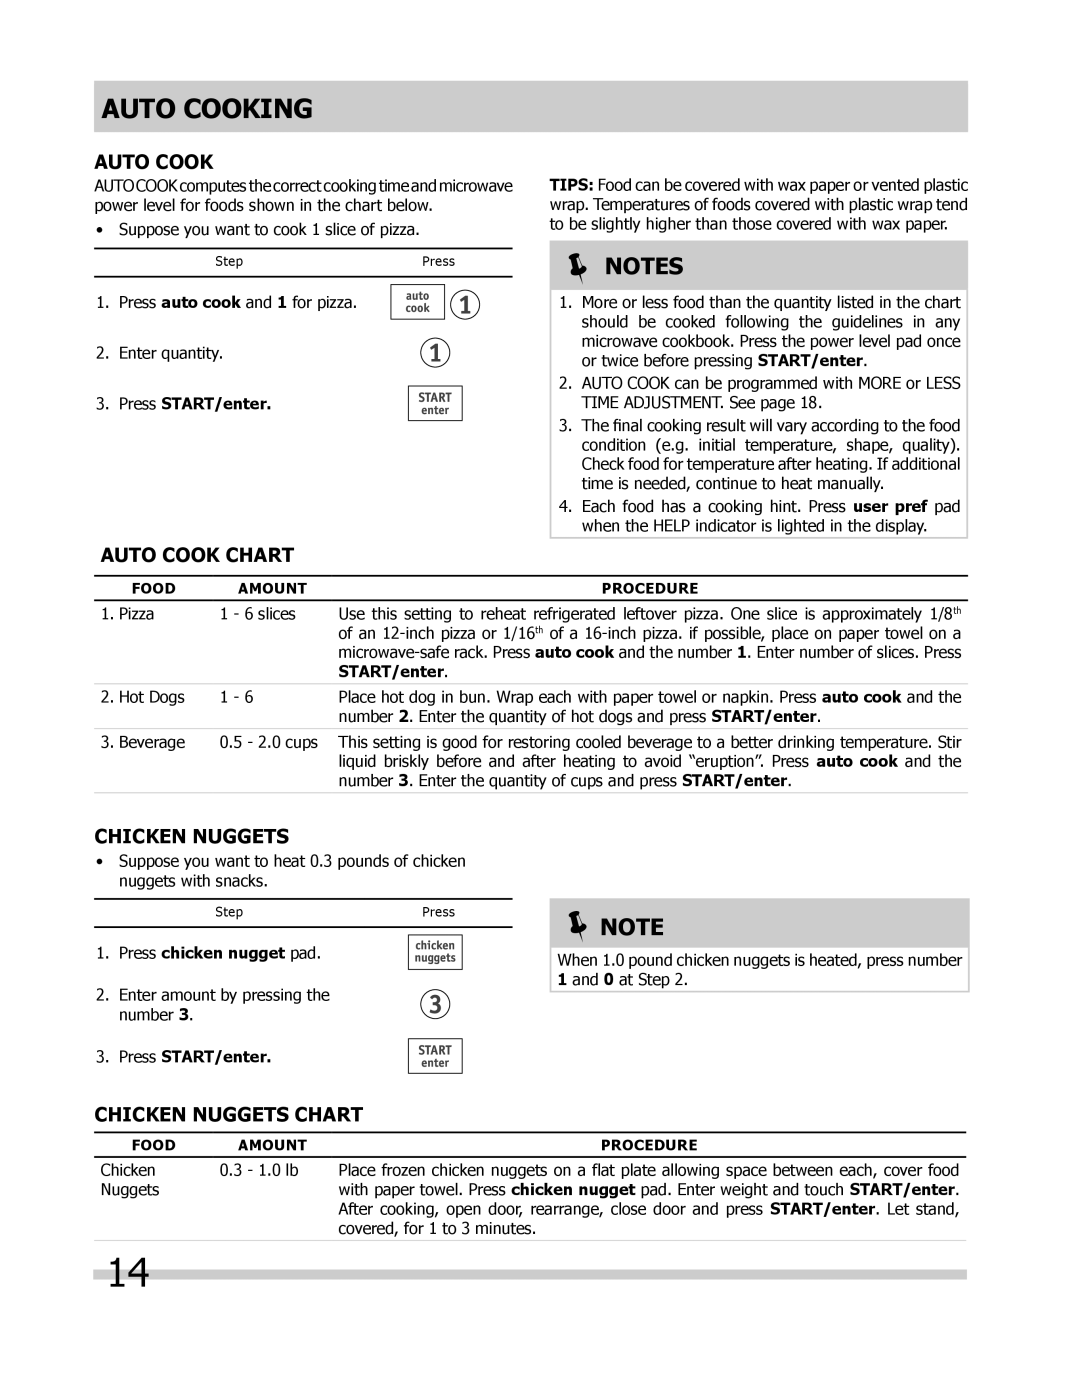 Frigidaire FPMO209 Note, Auto Cook Chart, Chicken Nuggets CHART, START/enter, Press chicken nugget pad,  Notes 